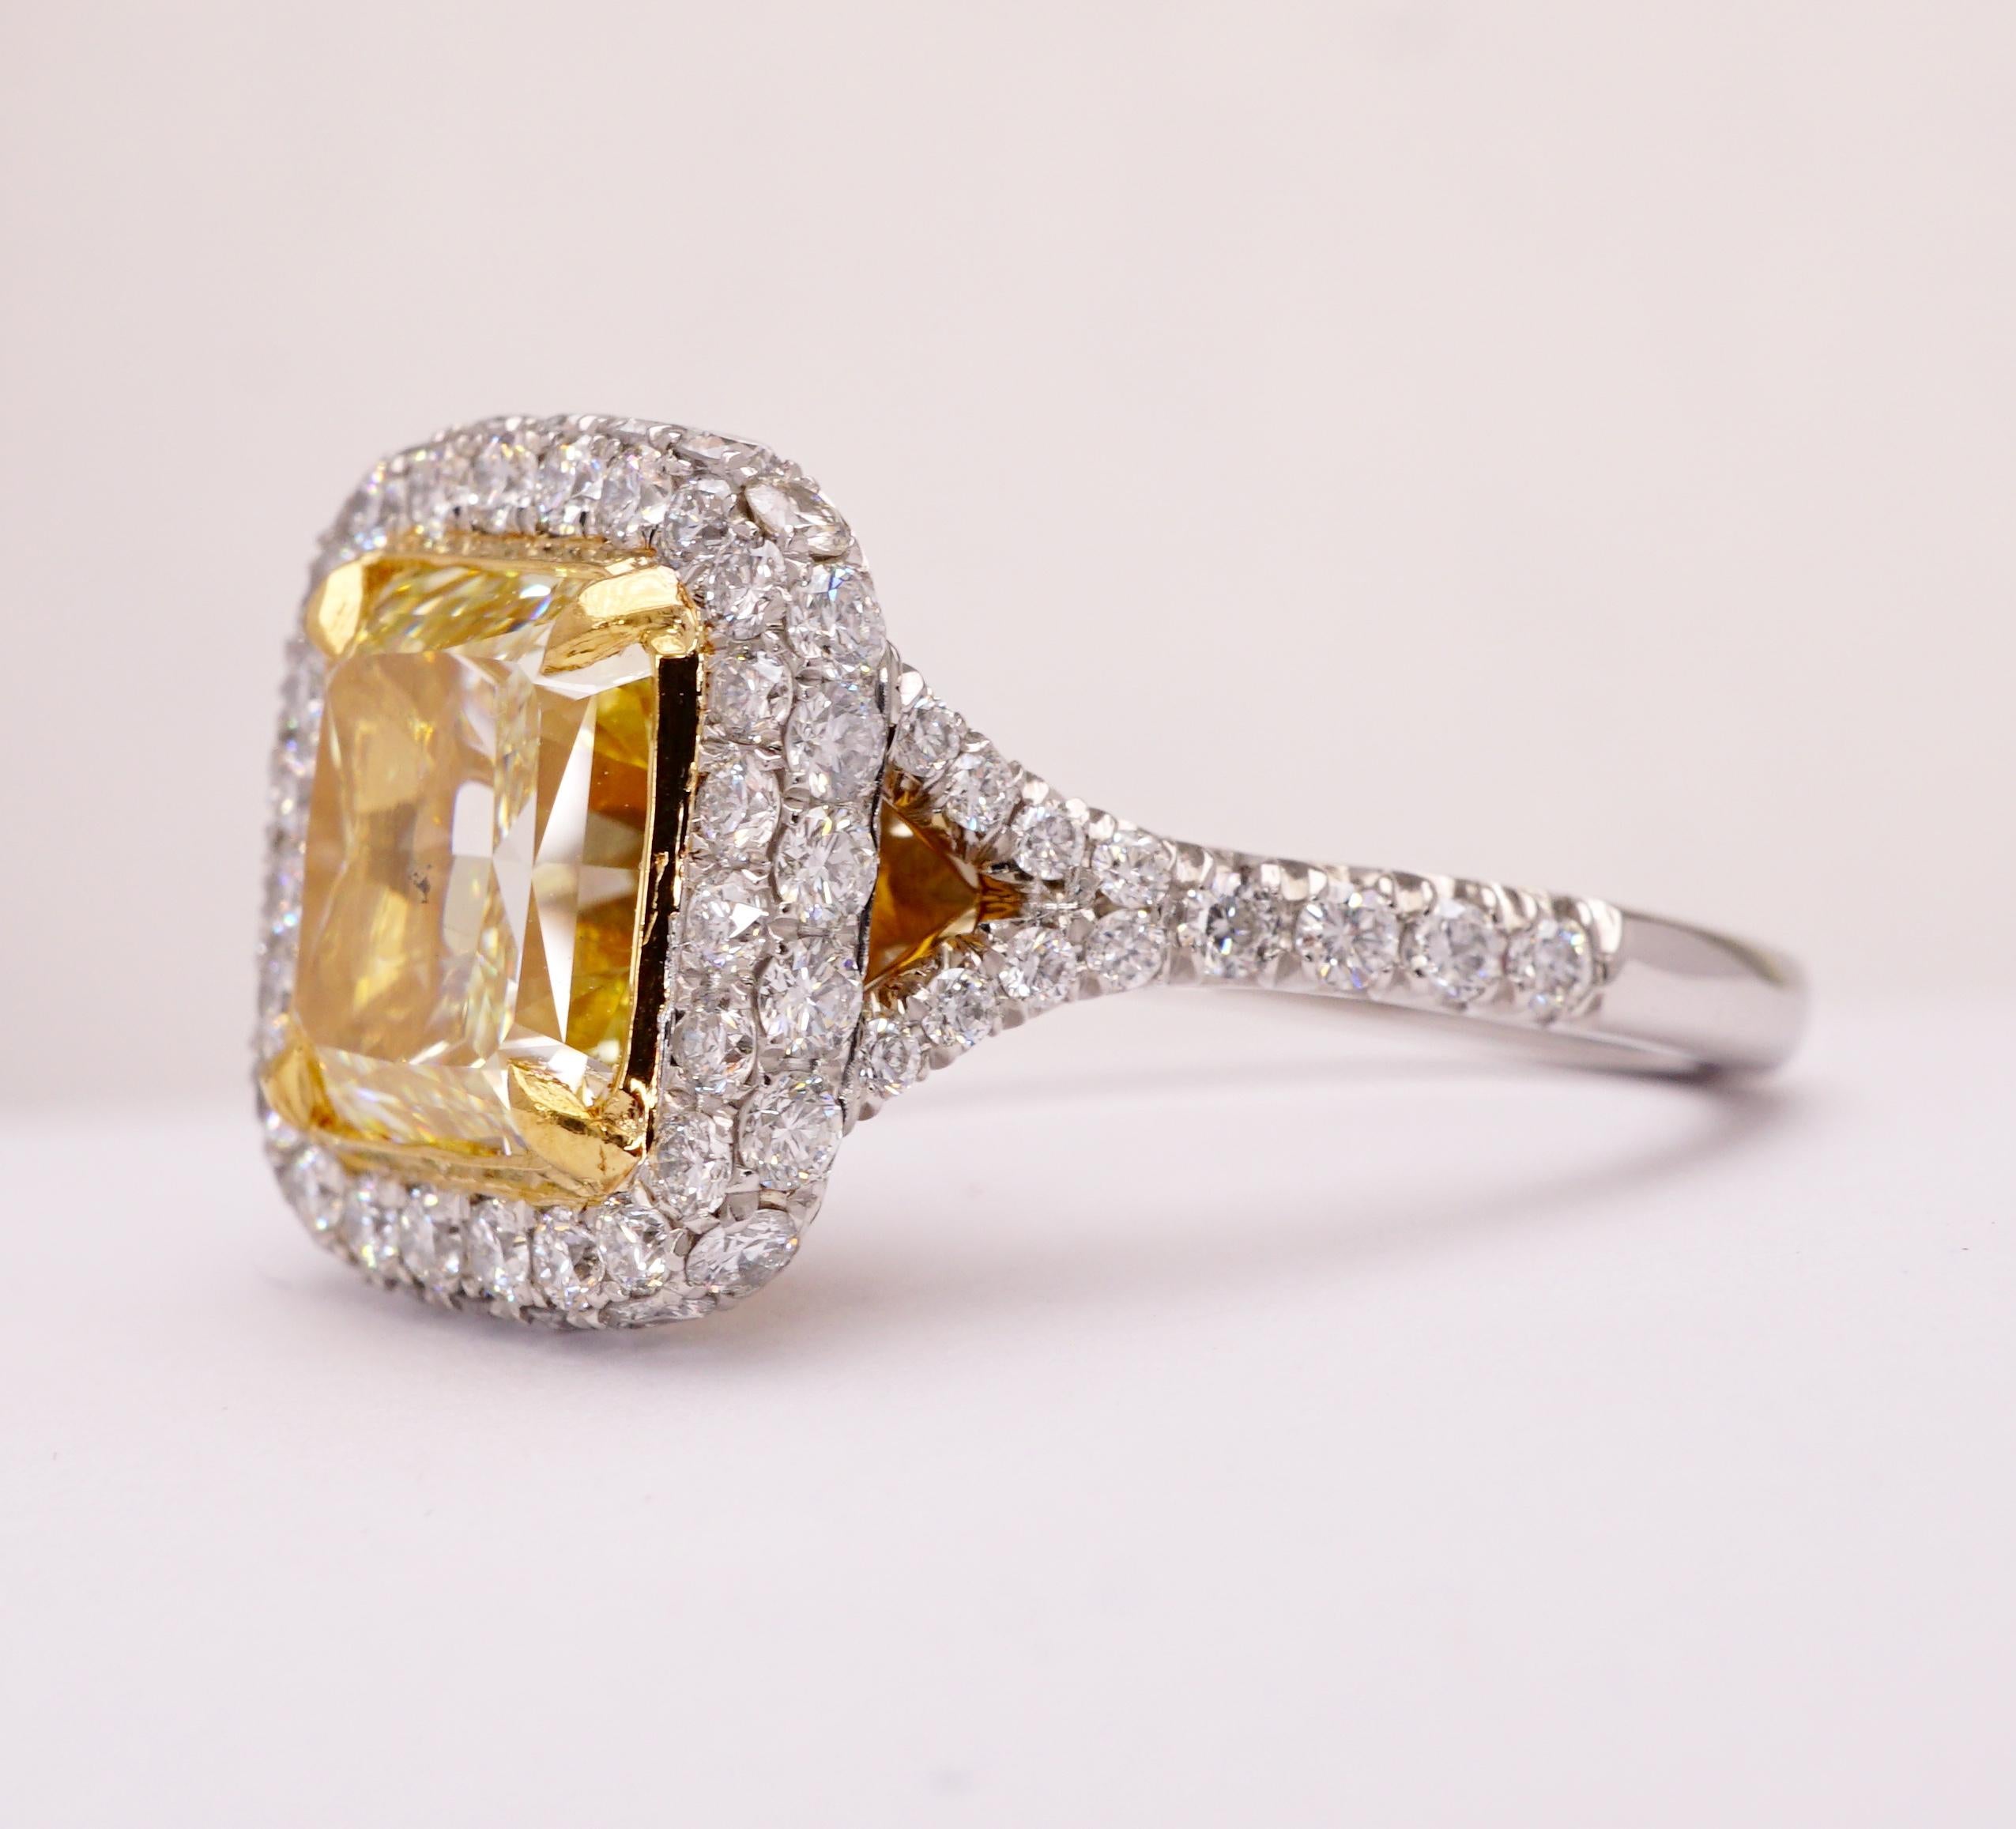 Contemporary Certified Fancy Yellow Radiant 2.84 Carat Diamond Cocktail Ring Set in Platinum For Sale